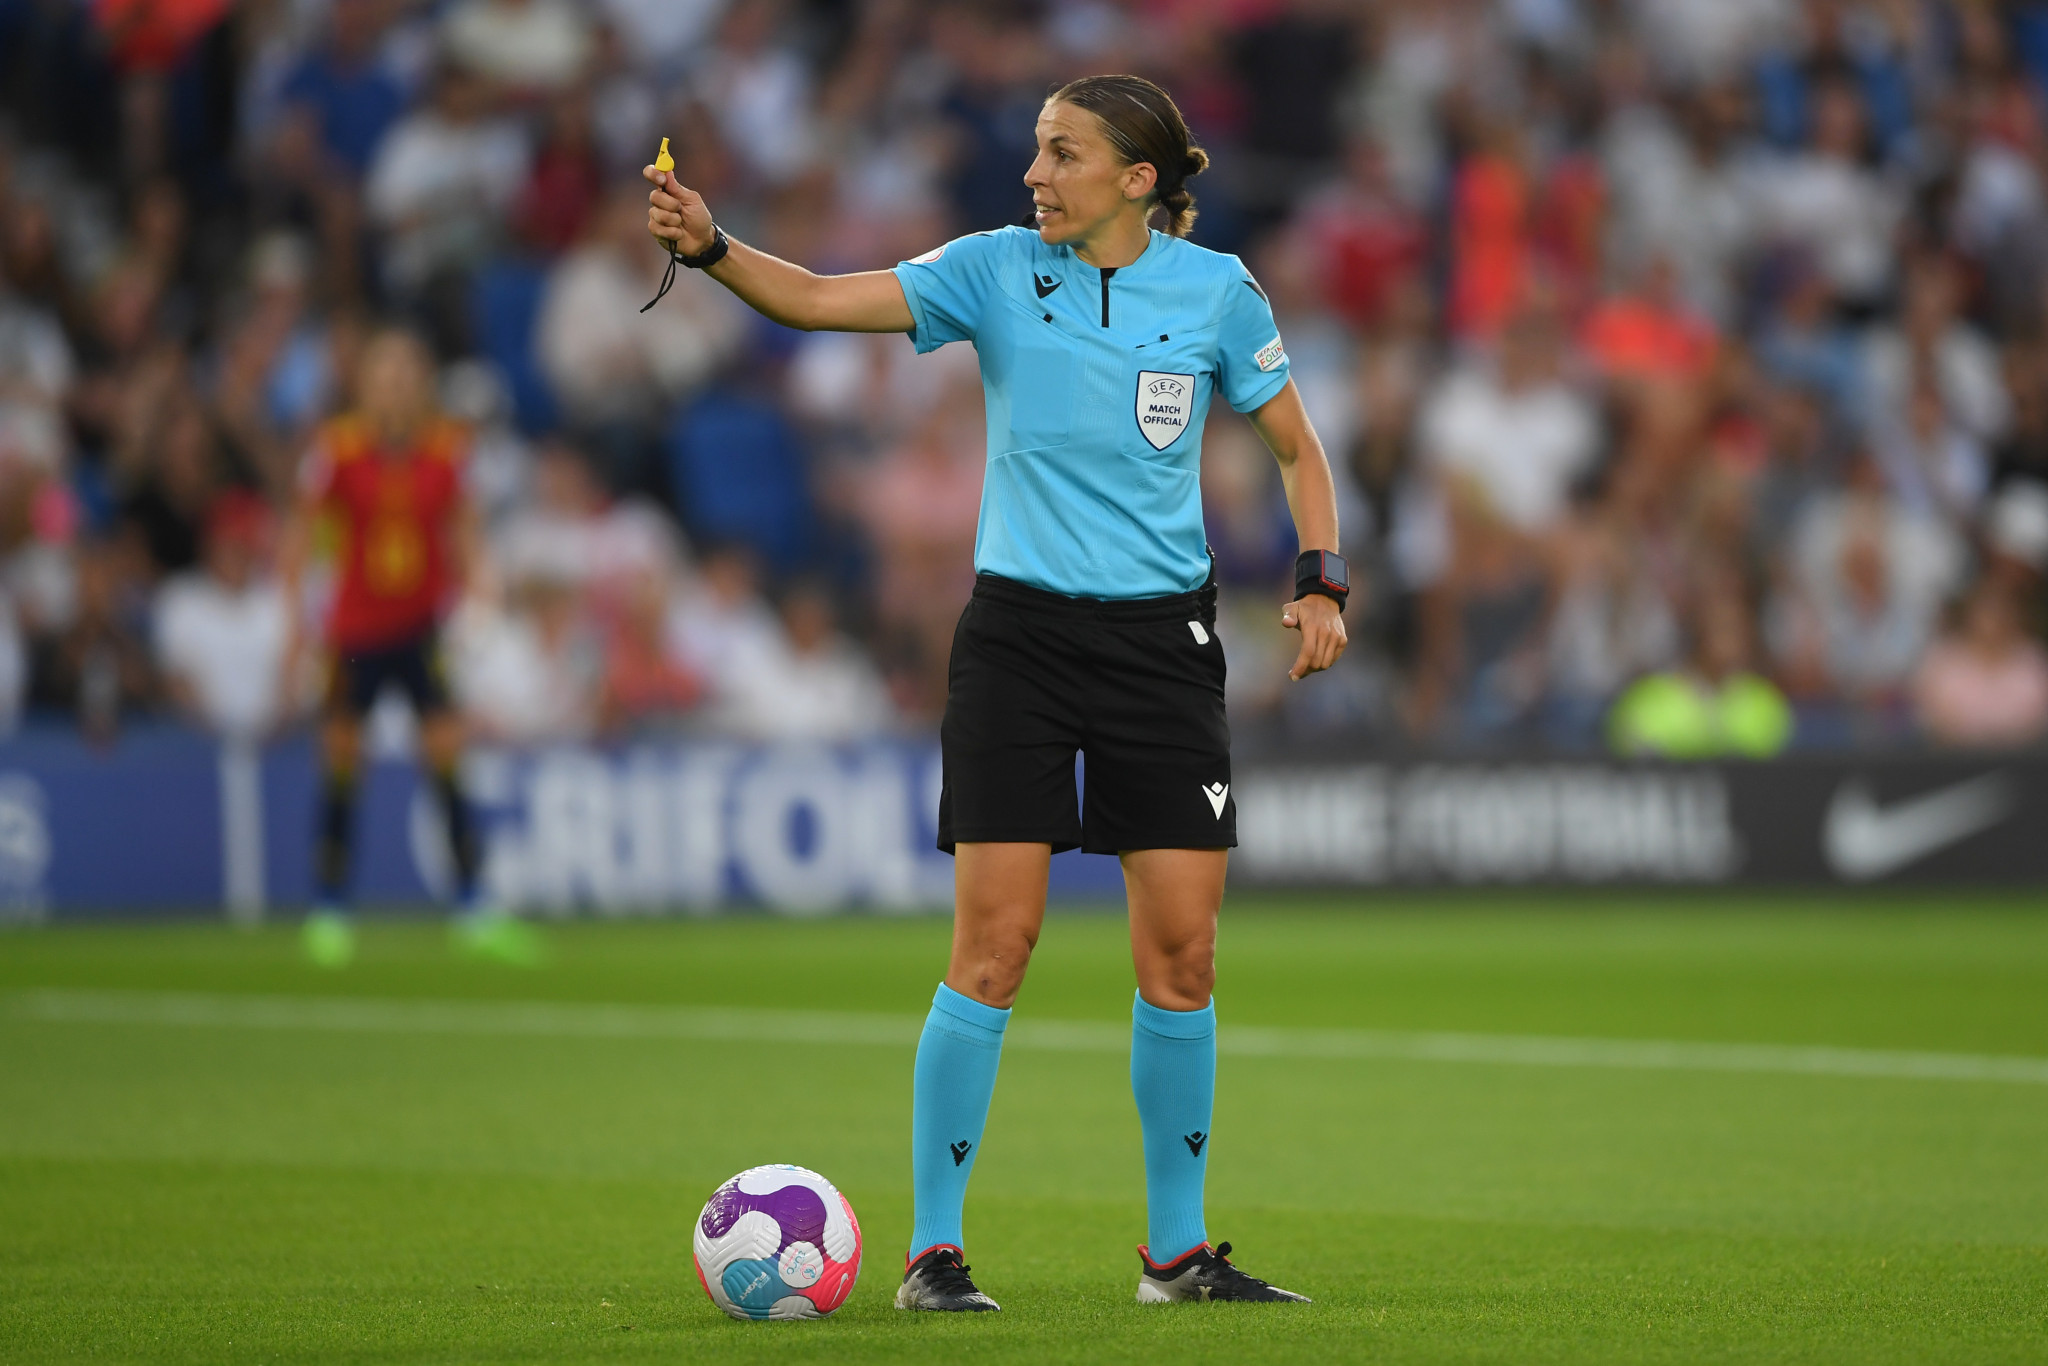 Stephanie Frappart is set to become the first woman referee at the men's FIFA World Cup in Qatar ©Getty Images